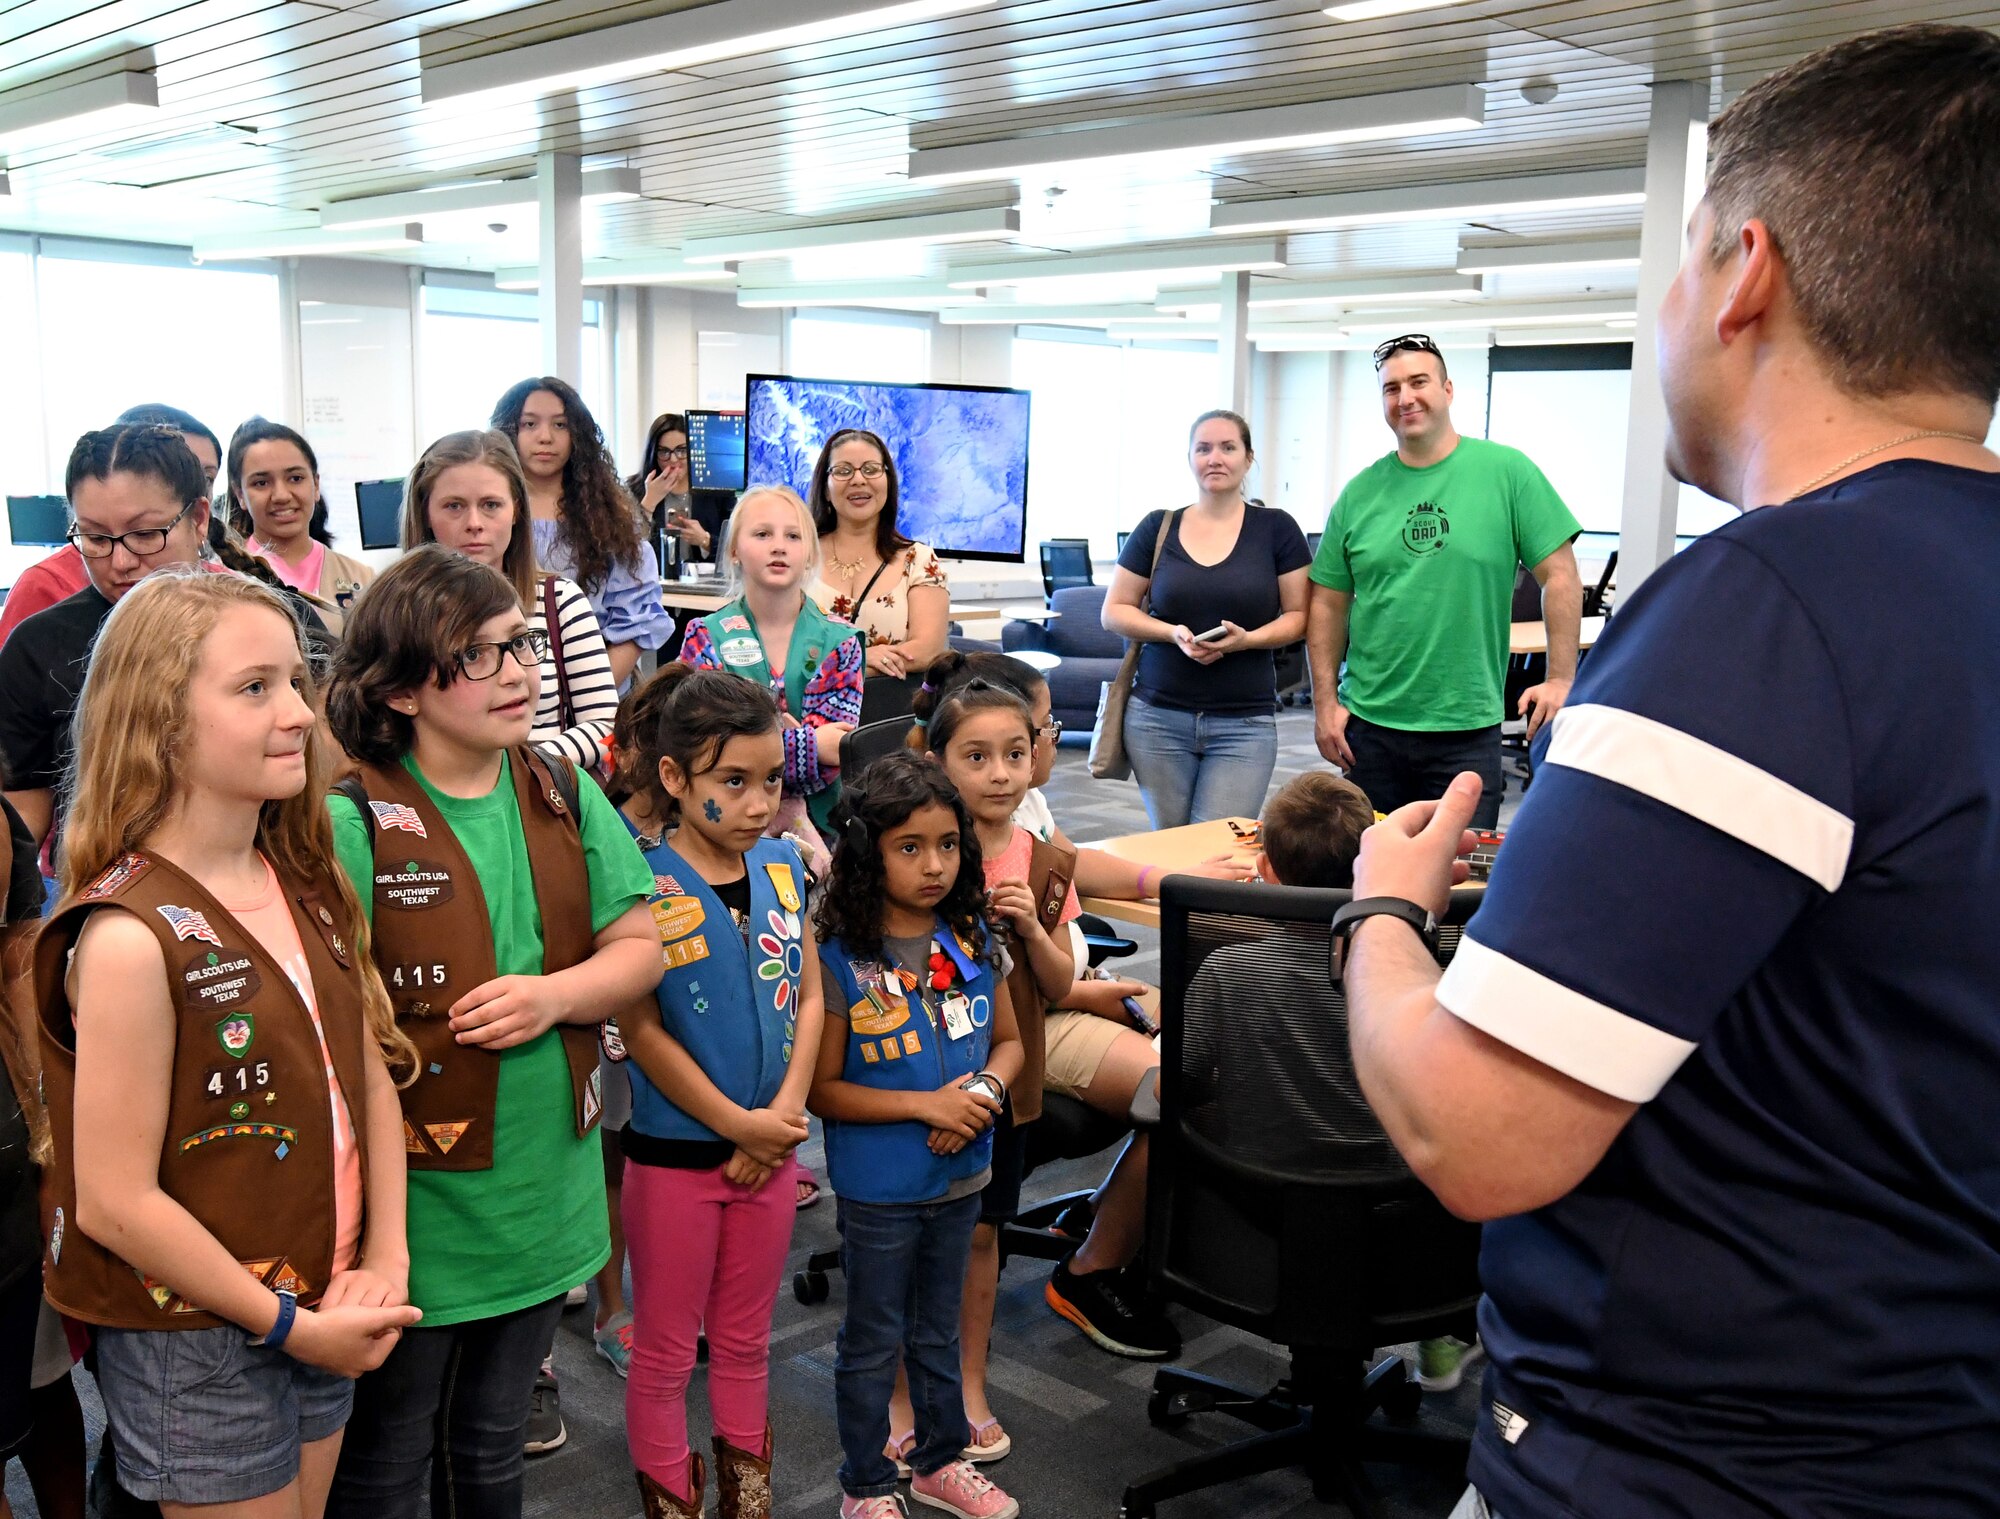 Christopher De La Rosa, 90th Cyberspace Operations Squadron cyber modeling and simulation environments lead, welcomes Girl Scouts to a “Bricks in the Loop” tour in San Antonio, Texas, April 19, 2019. “Bricks in the Loop” mimics an Air Force installation with items such as a fire station, police station, airport, jets and tanker trucks, all used to simulate real-world cyber systems in training cyber operators. (U.S. Air Force photo by Tech. Sgt. R.J. Biermann)